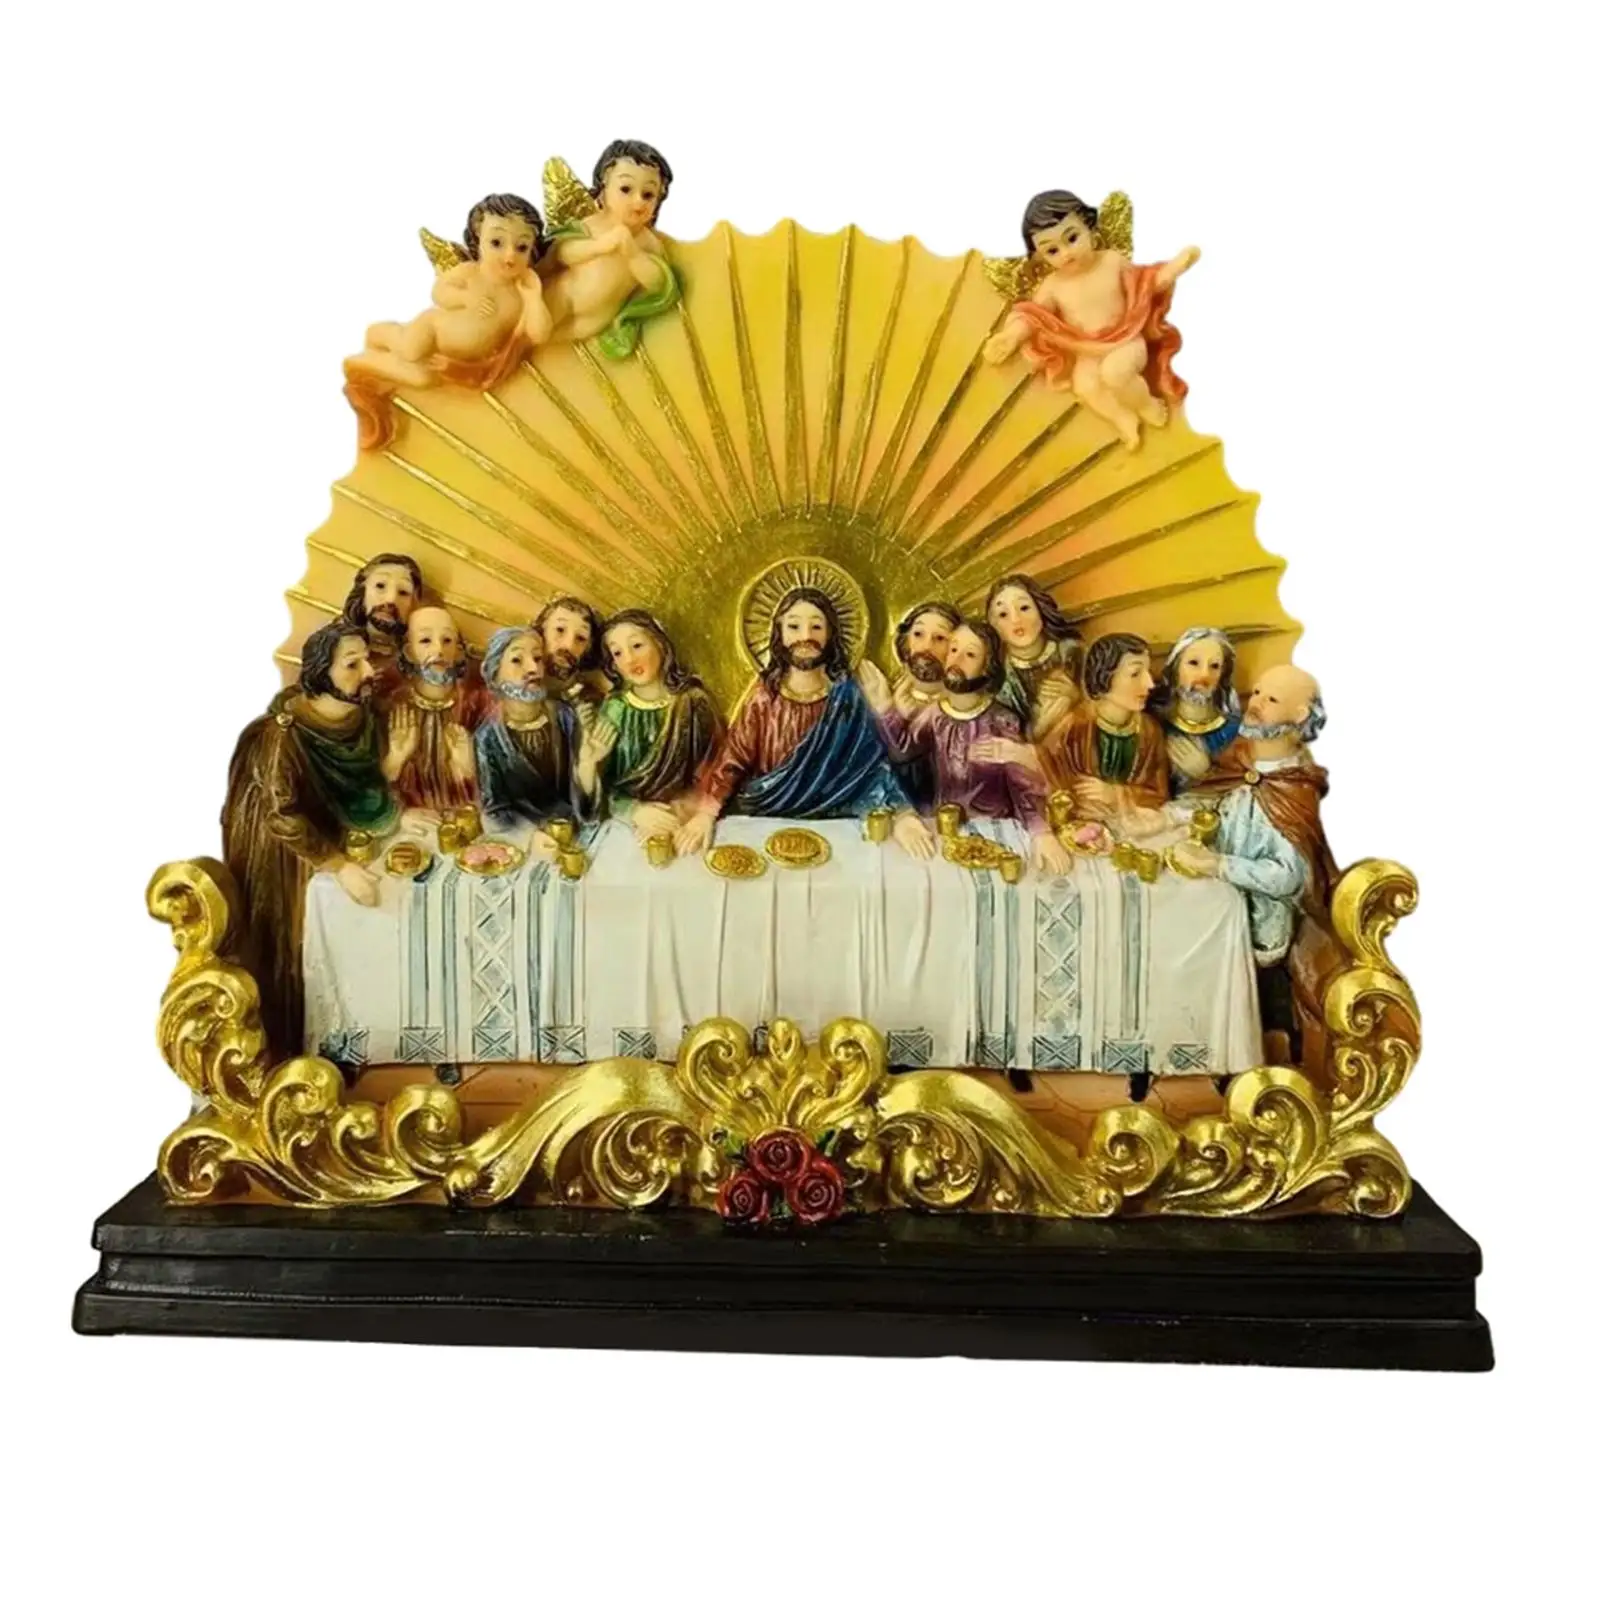 Resin Last Supper Sculpture Statue Home Decor Crafts Religious Statue Sculpture for Bedroom Home Living Room Office Decoration